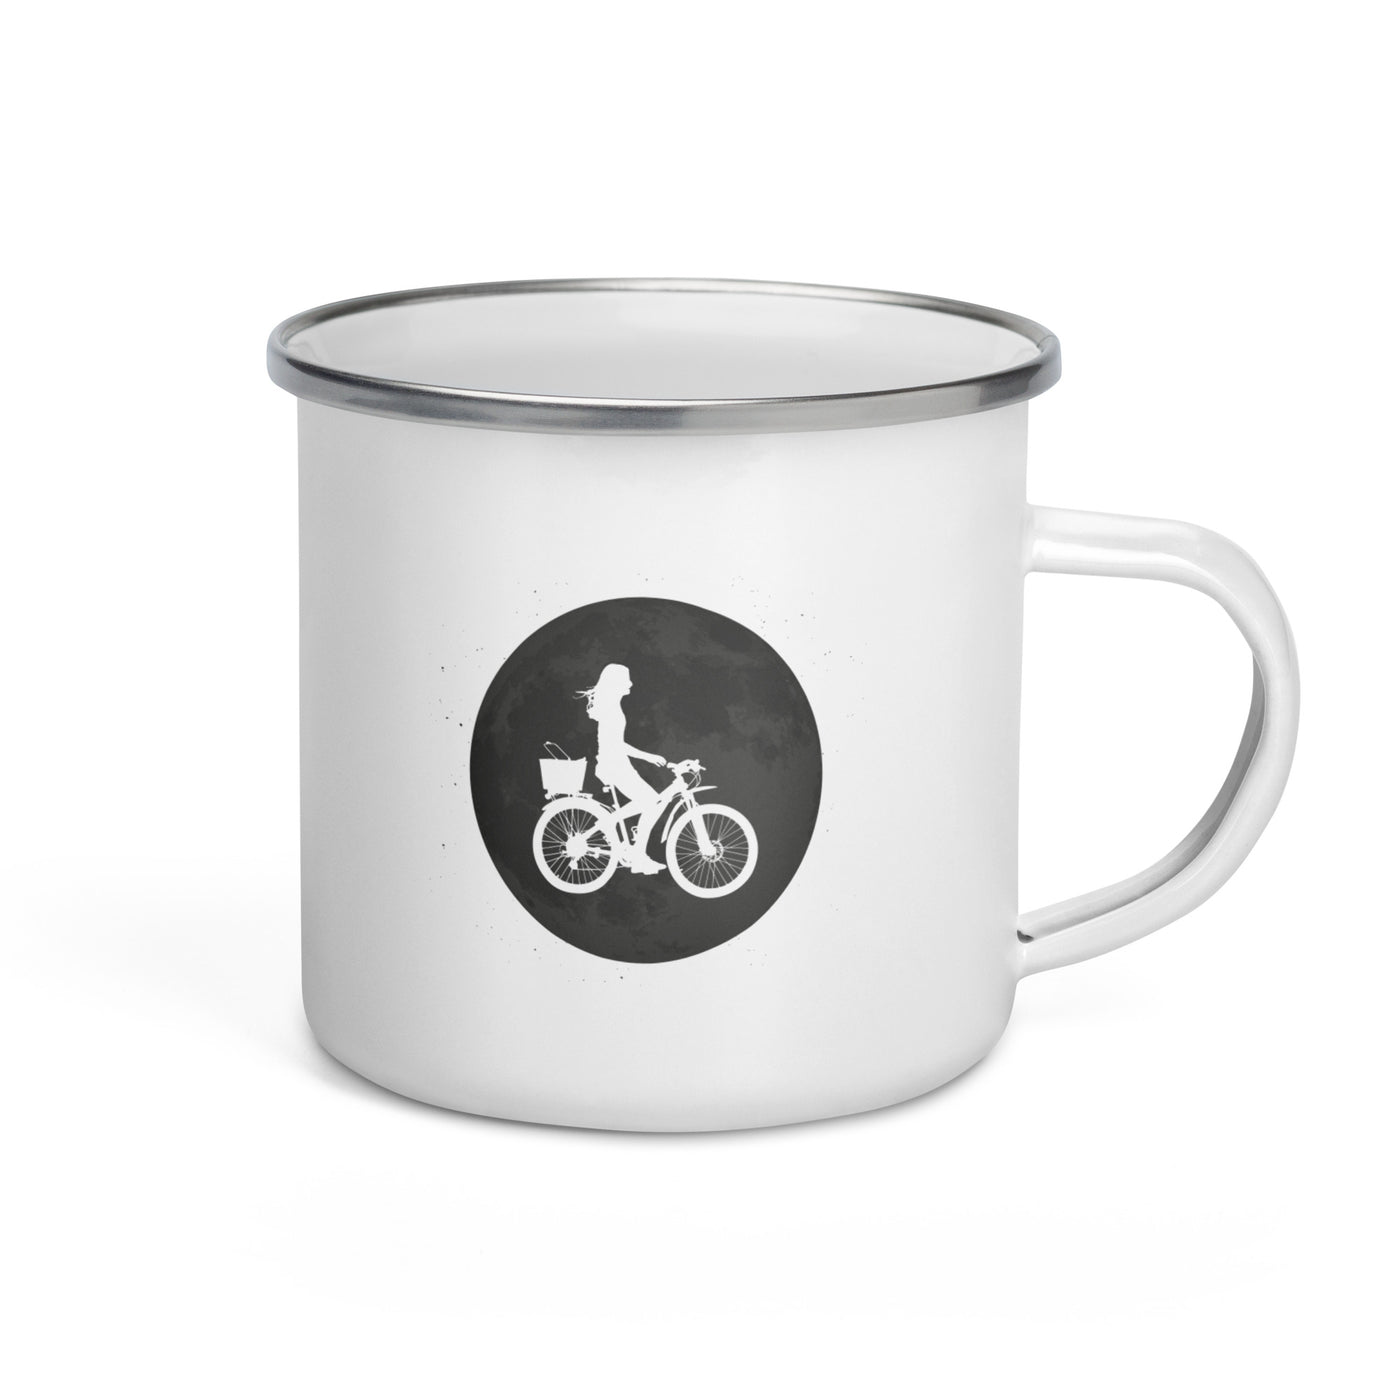 Full Moon - Female Cycling - Emaille Tasse fahrrad Default Title